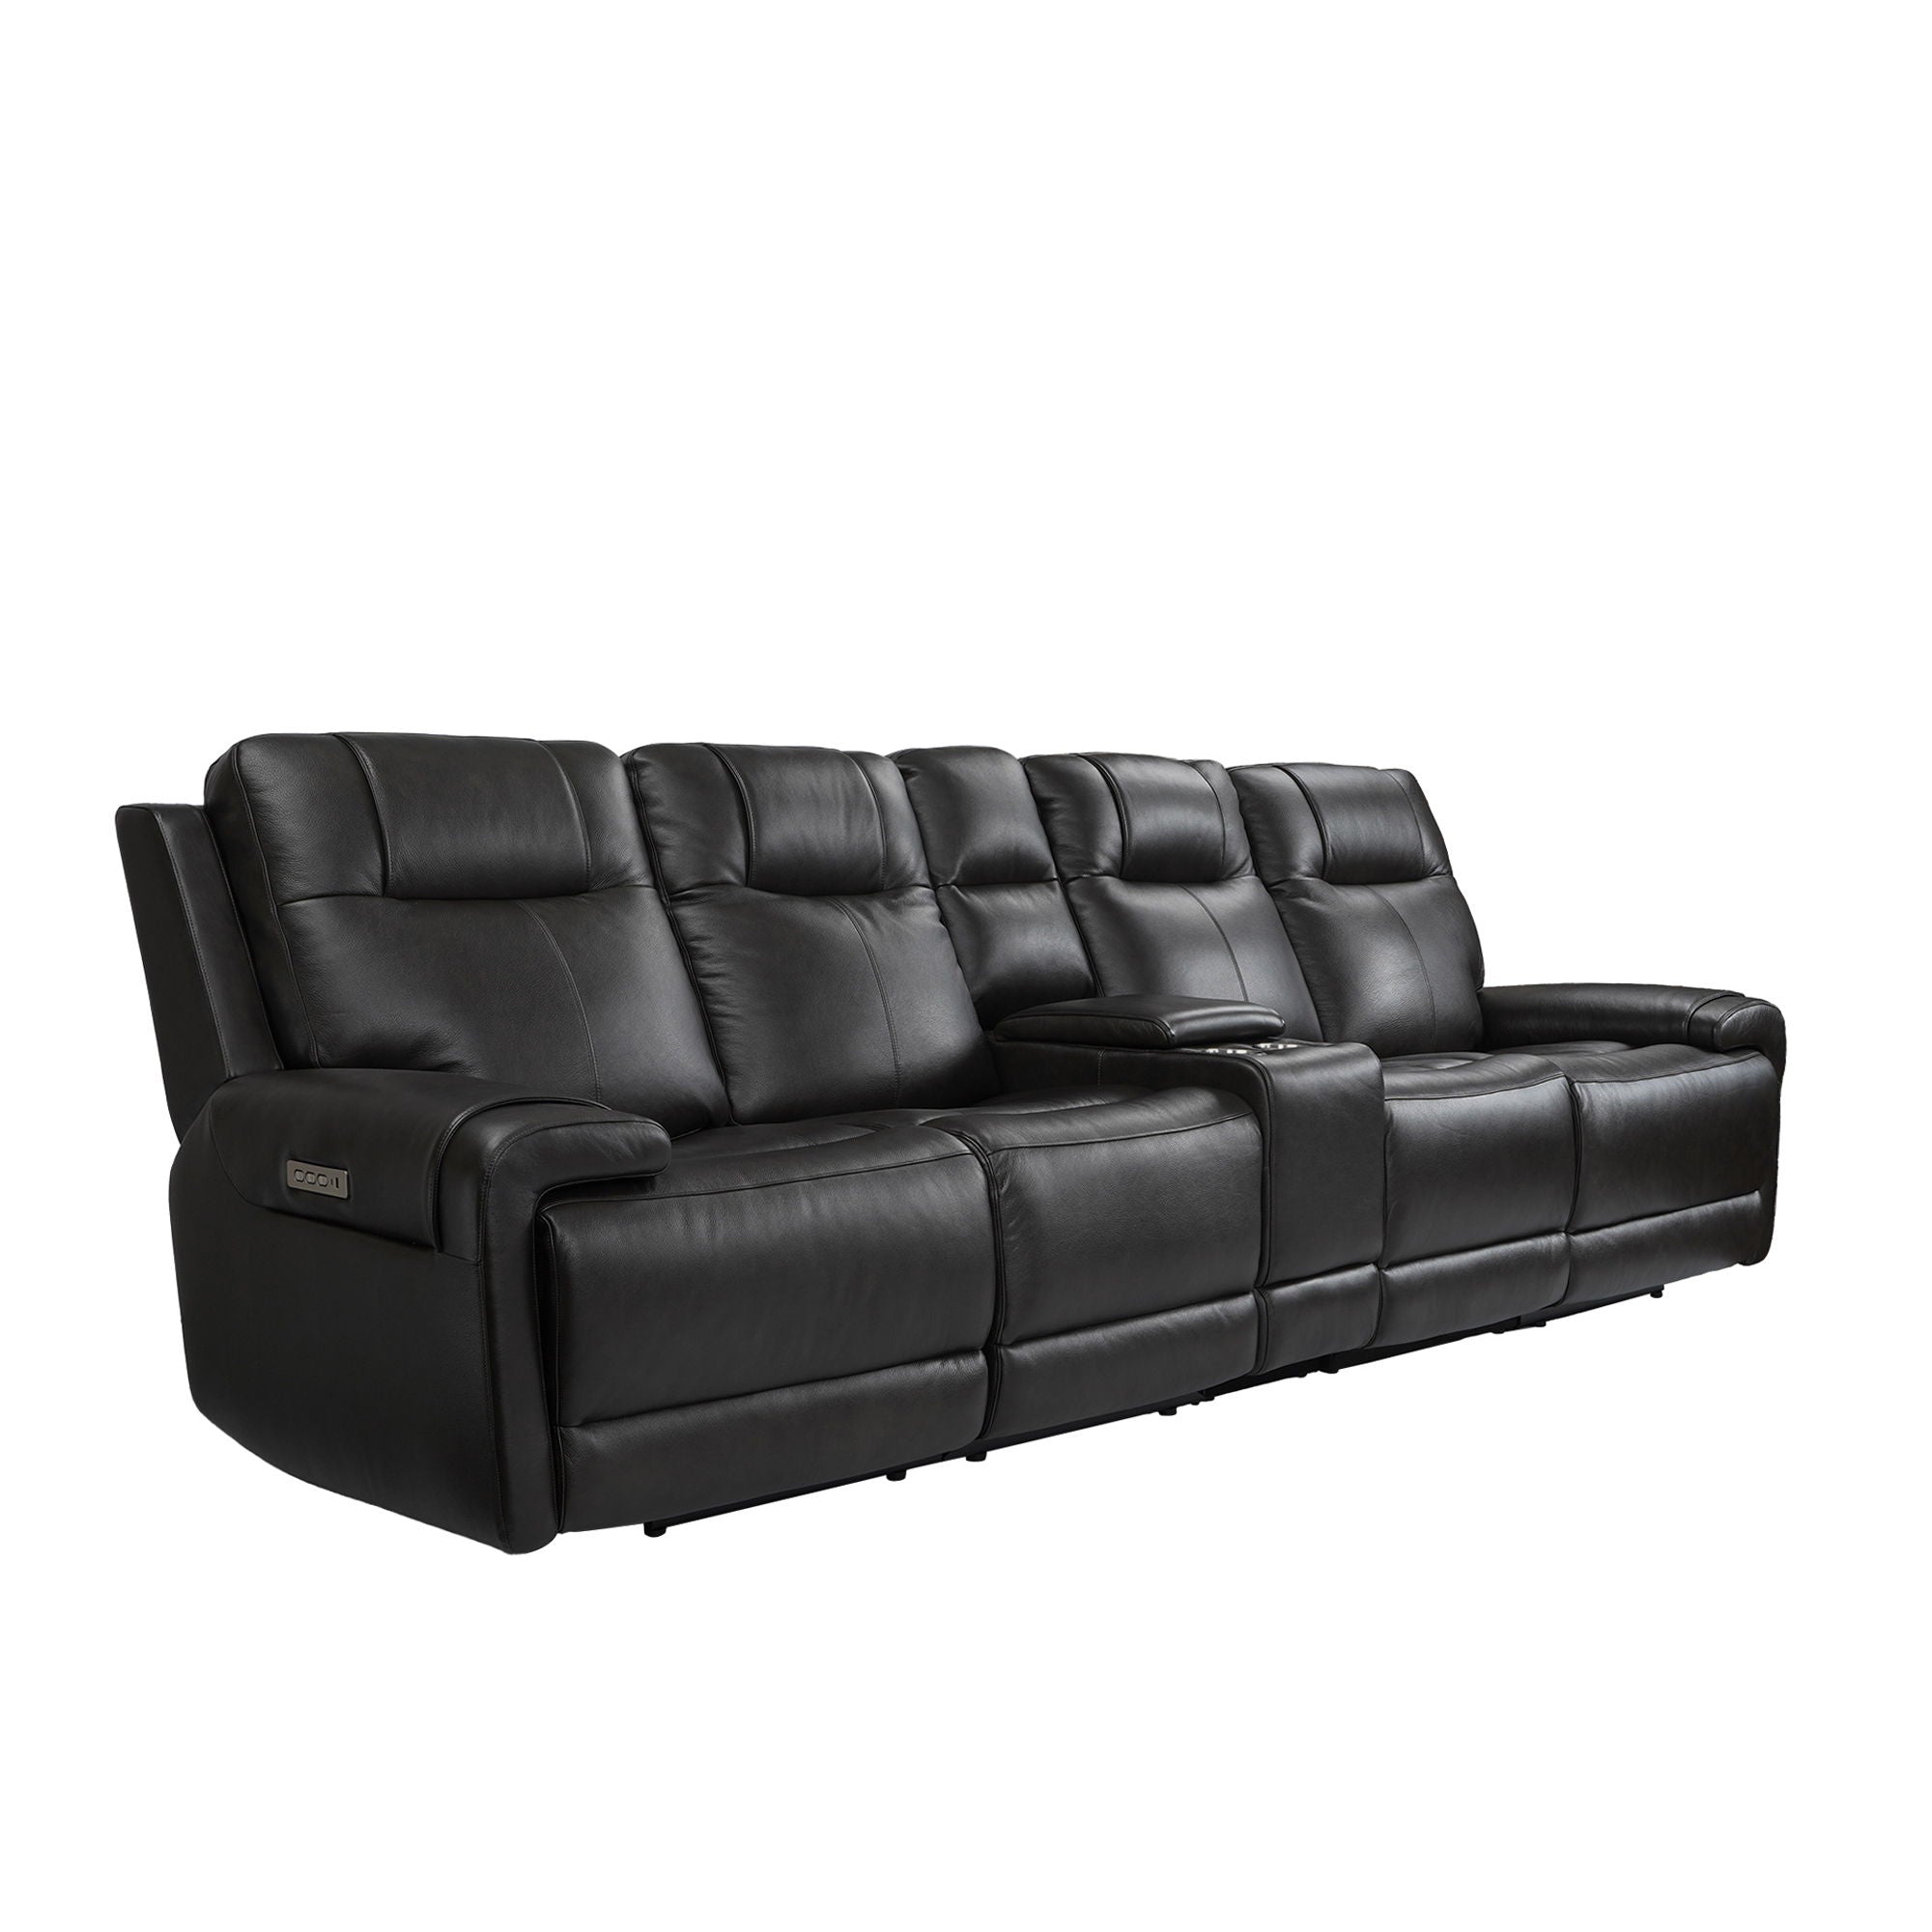 Trevor Triple 4 Seats Power Sofa With Console, Genuine Leather, Lumbar Support, Adjustable Headrest, USB & Type C Charge Port, Middle Armless Chair Are Stationary